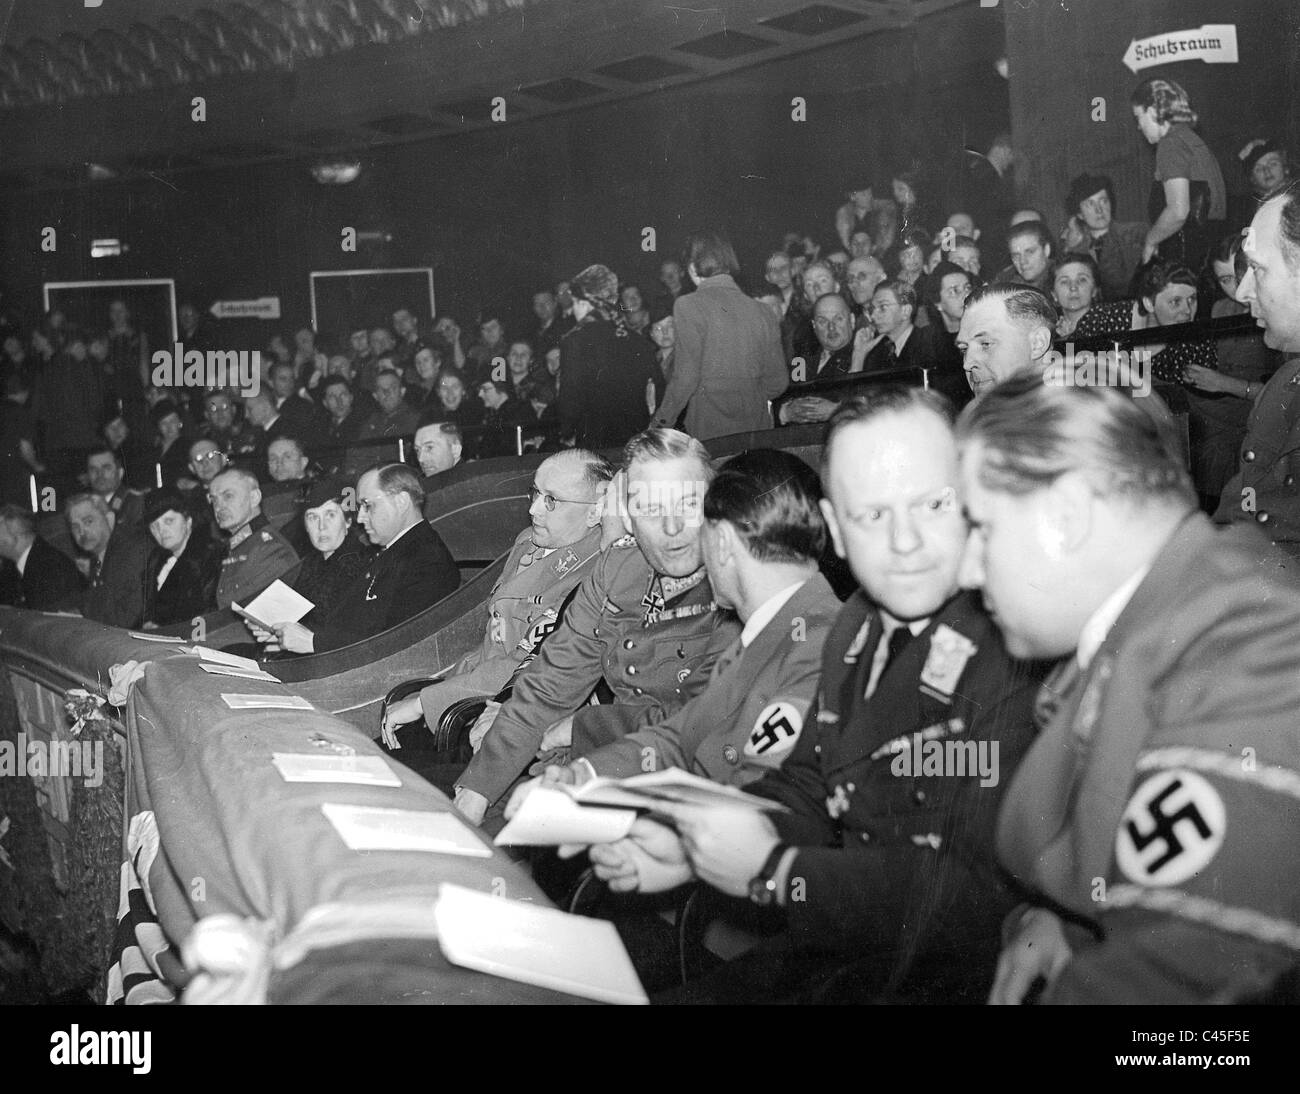 Gutterer, Milch, Goebbels and Keitel at a film viewing Stock Photo